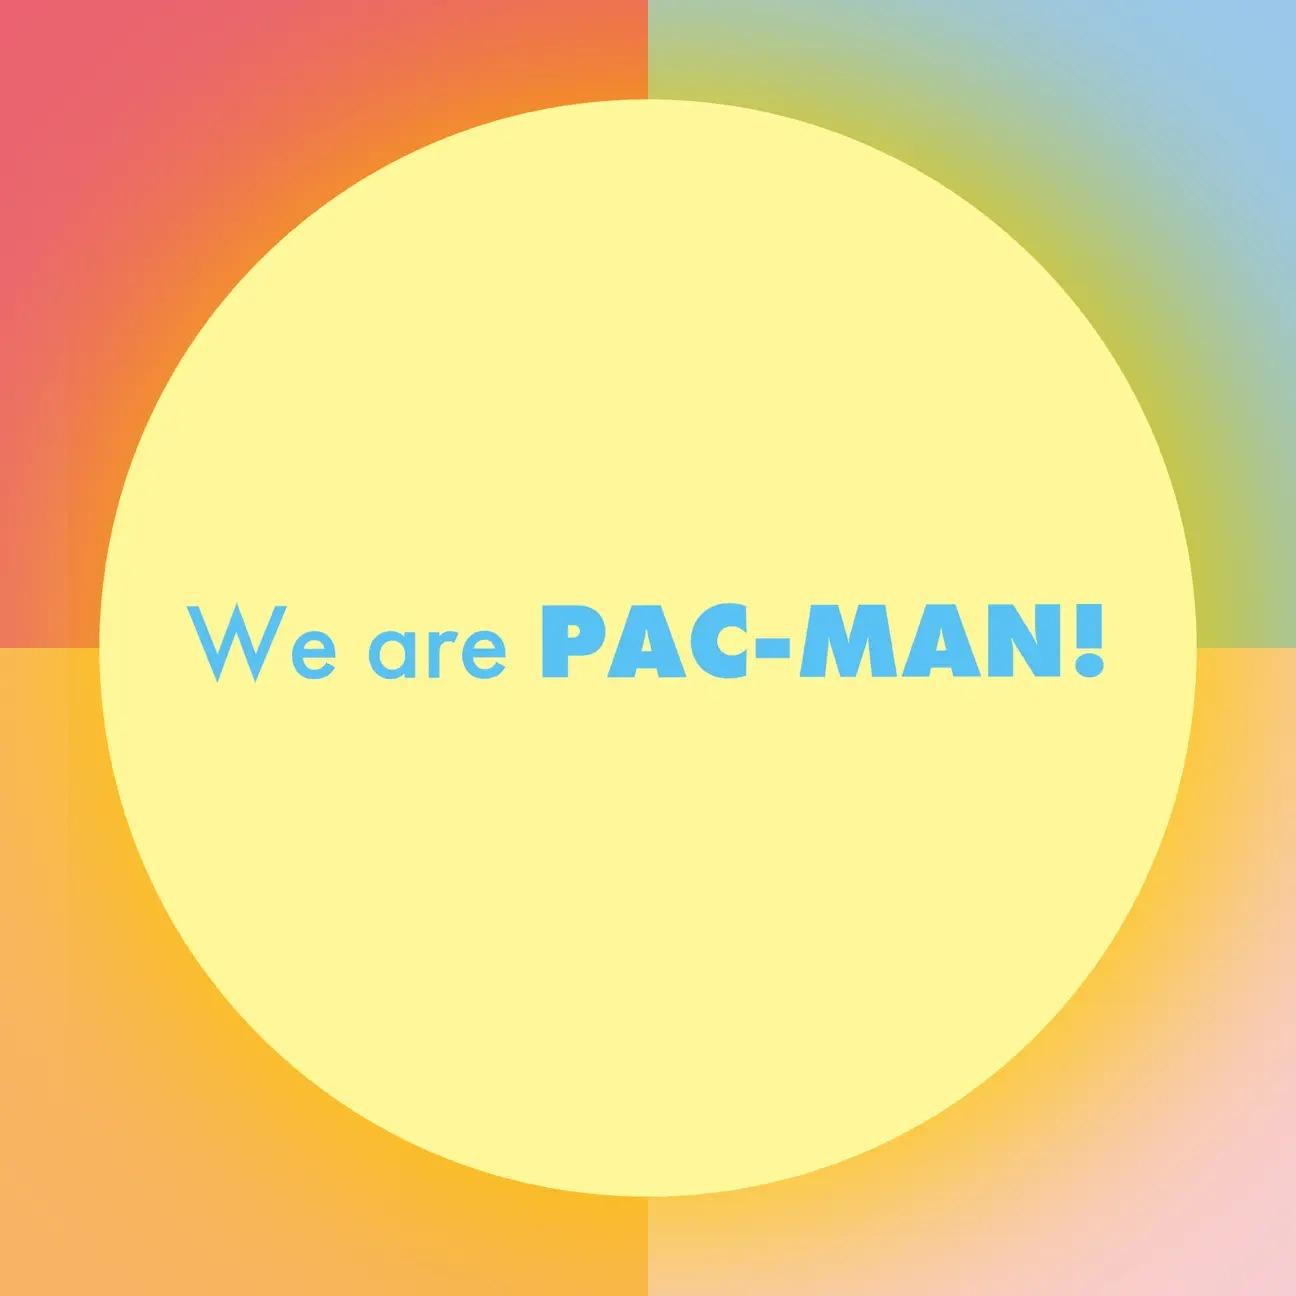 We are PAC-MAN!